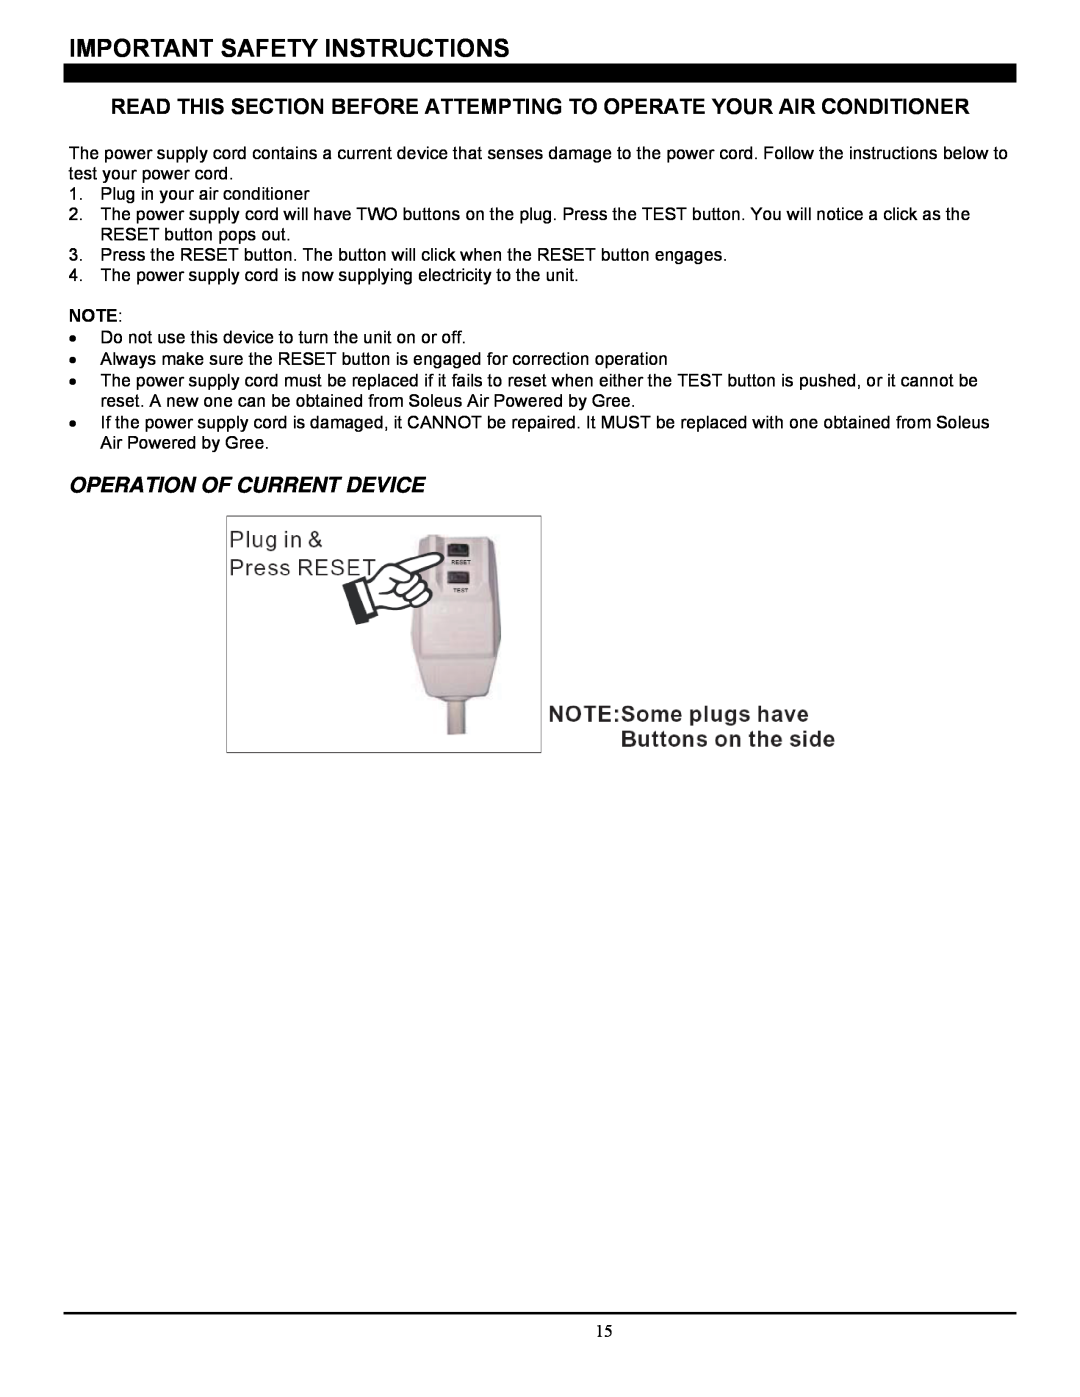 Soleus Air SG-CAC-08ESE manual Important Safety Instructions, Operation Of Current Device 